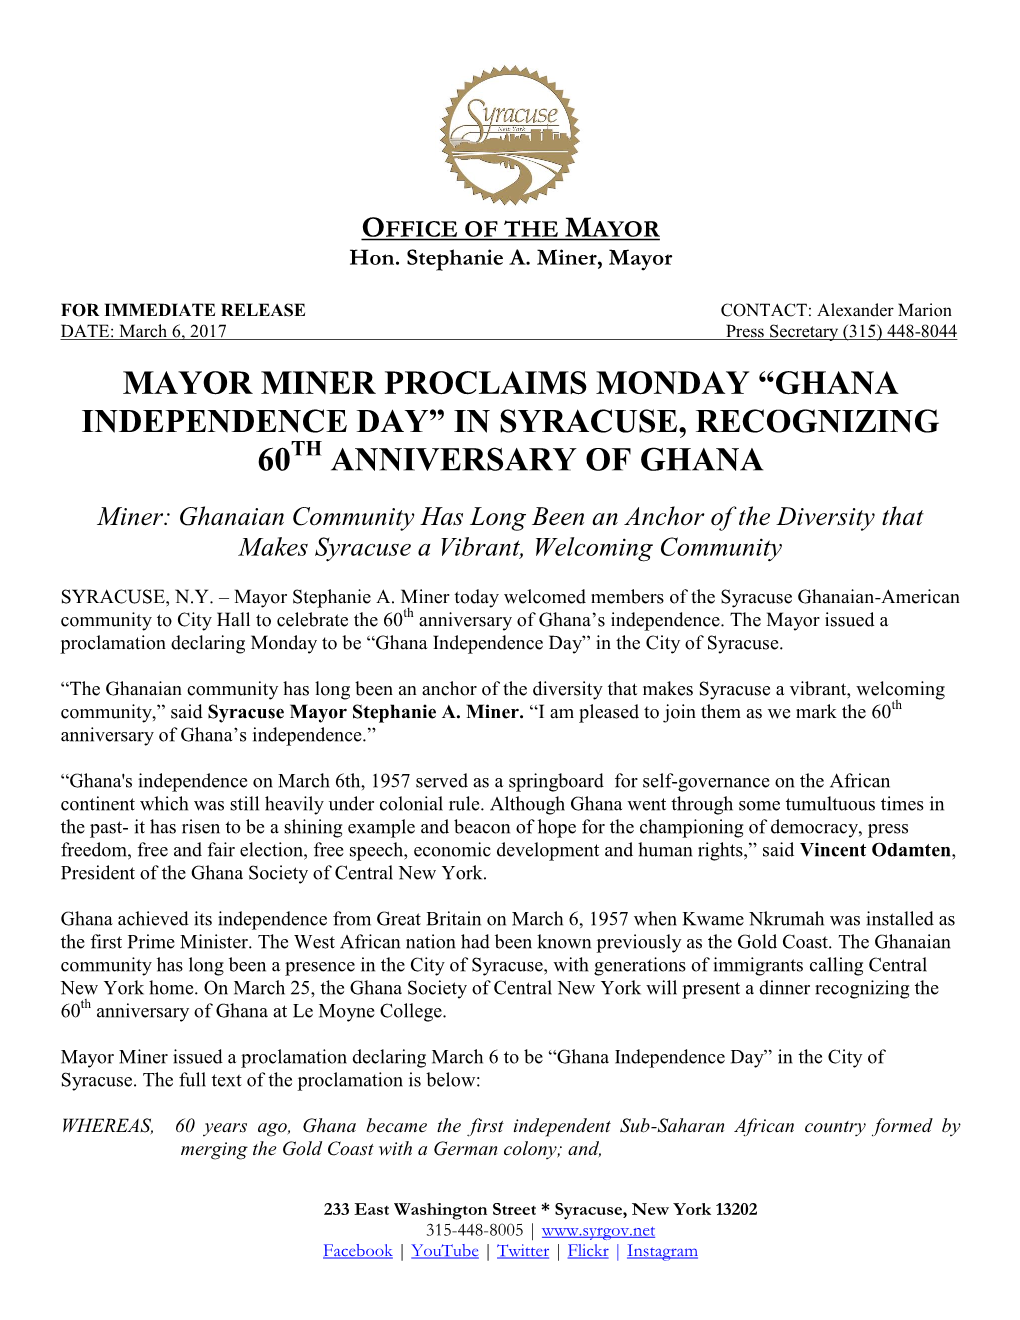 Ghana Independence Day” in Syracuse, Recognizing 60Th Anniversary of Ghana